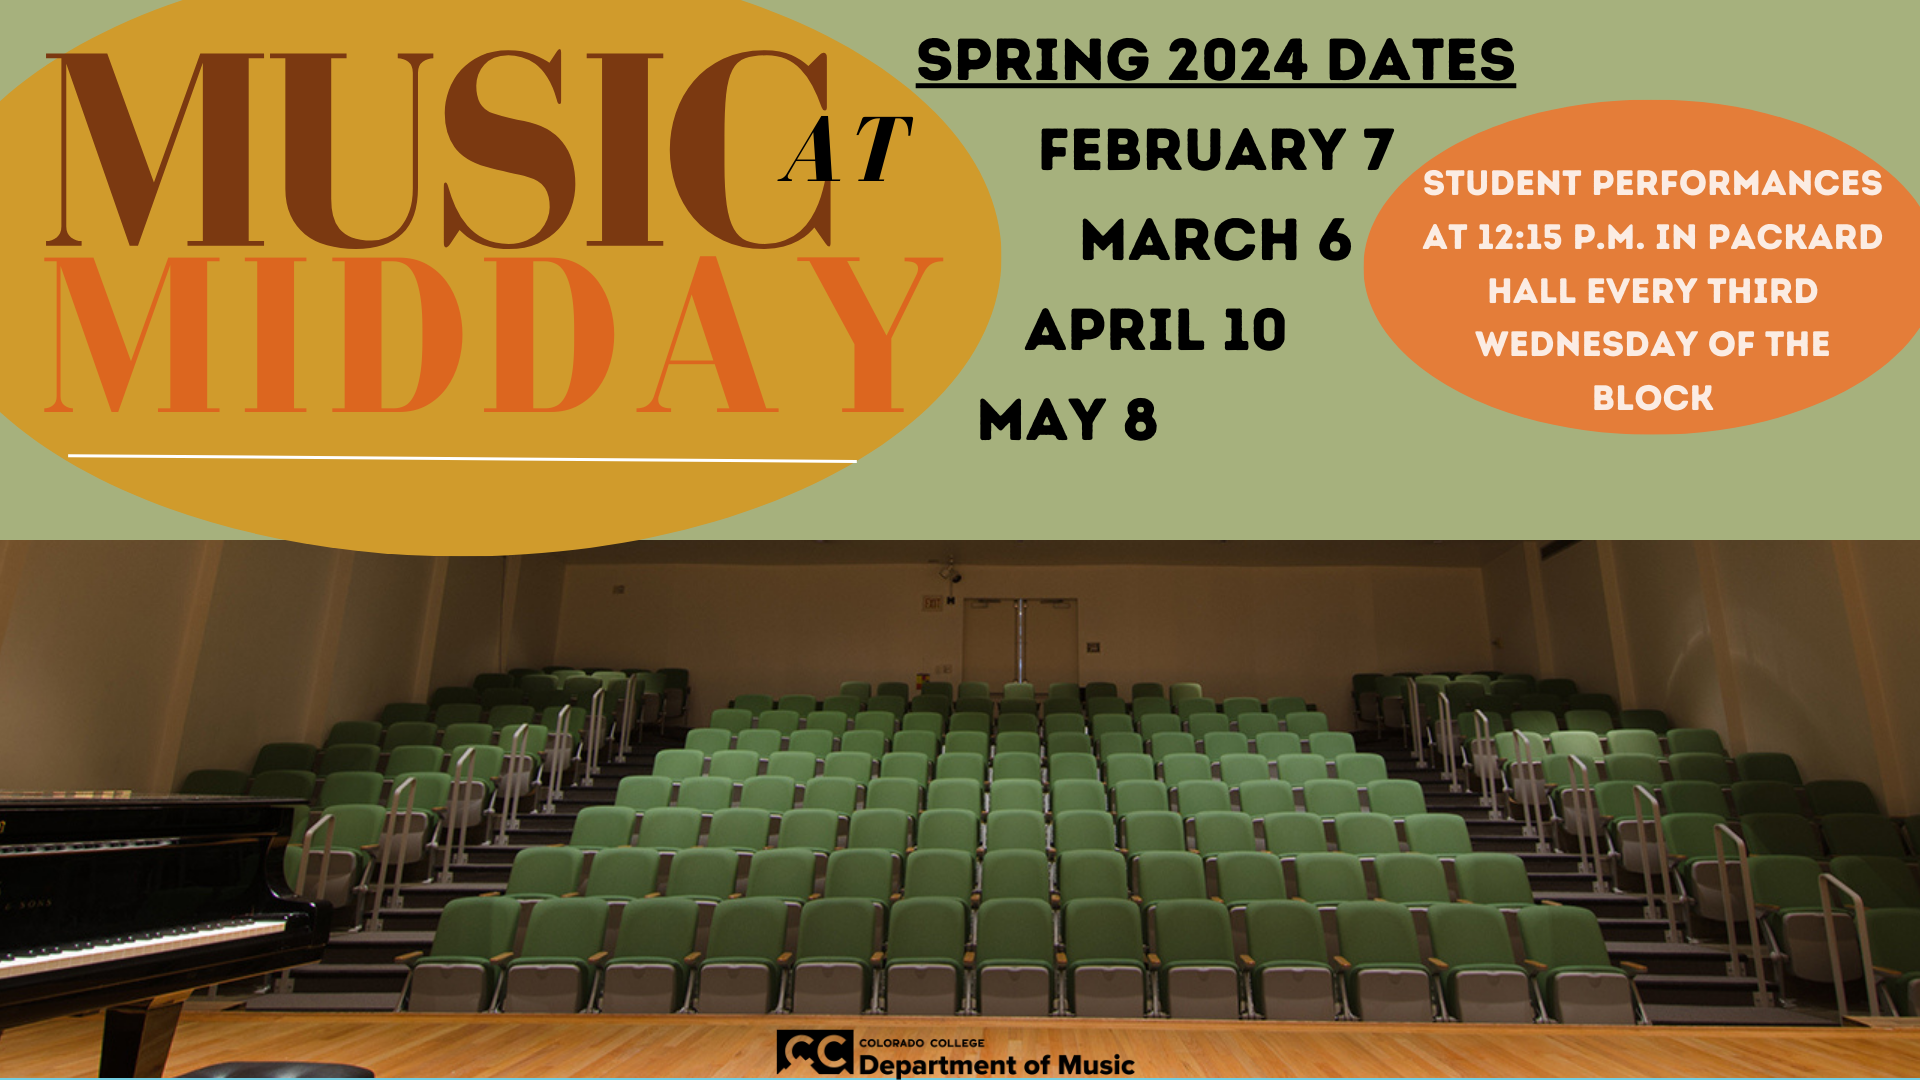 Spring-2024-MUSIC-AT-MIDDAY-1920-1080-px.png